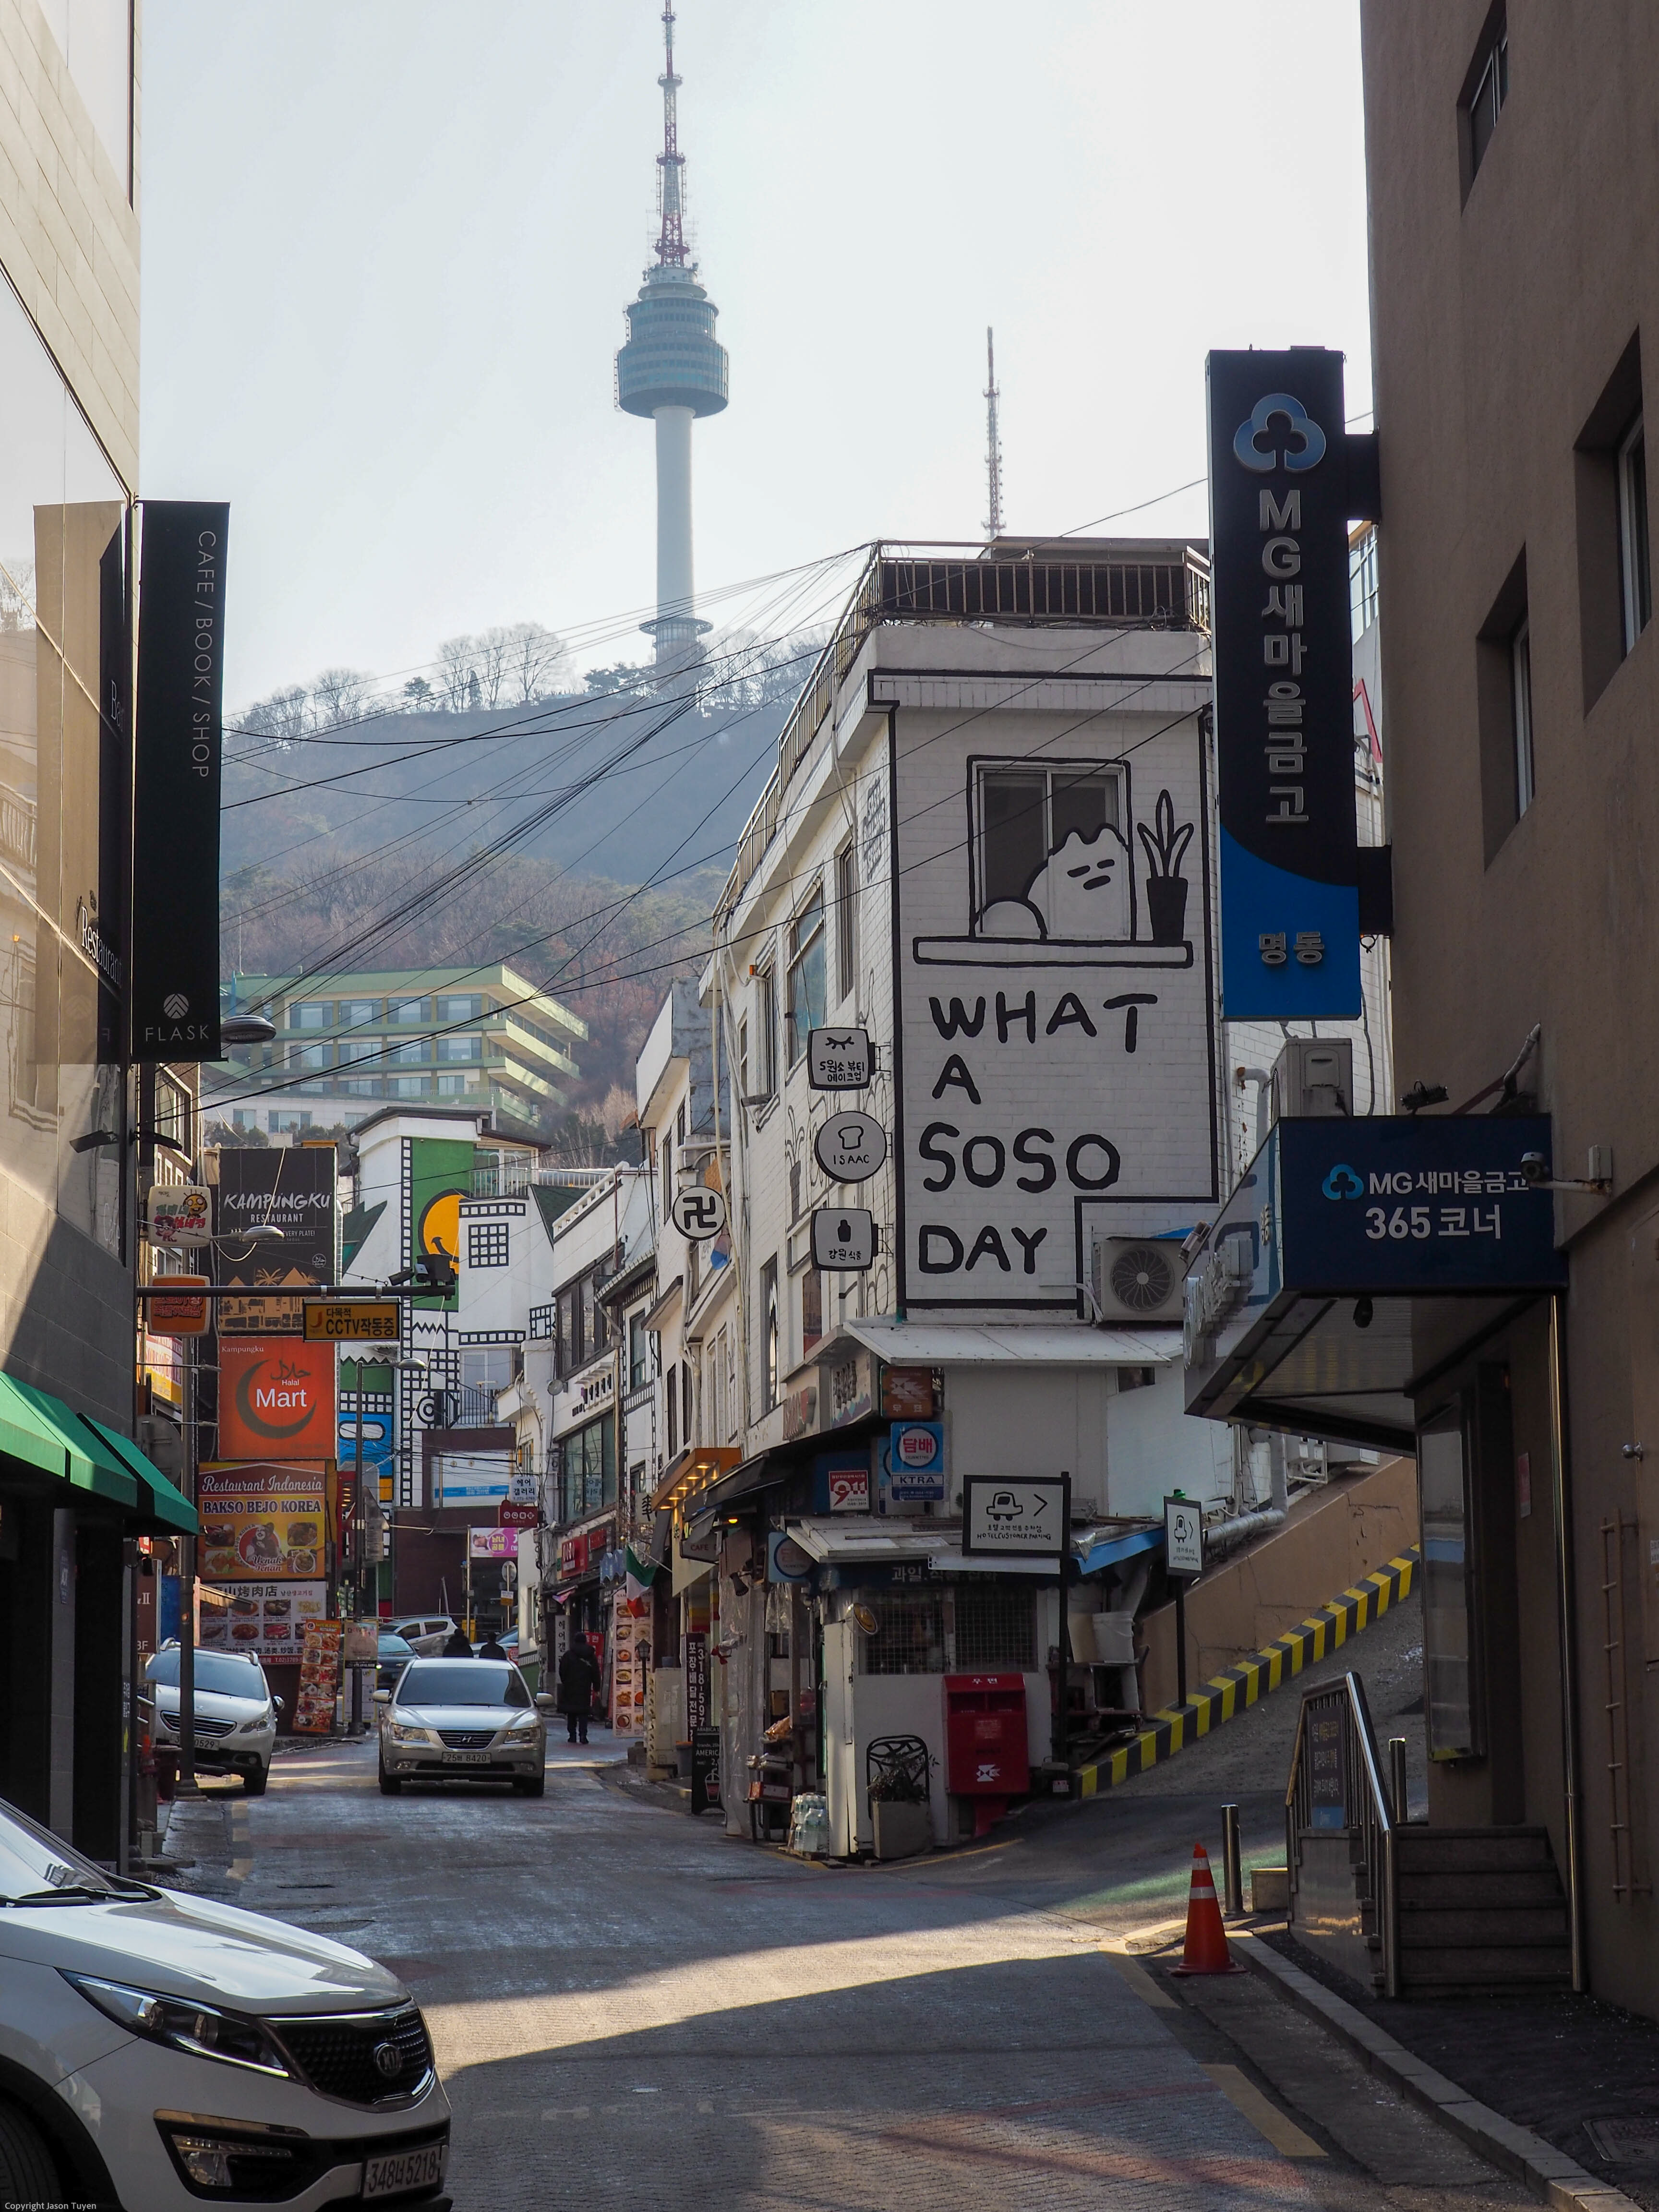 The N Seoul Tower as seen from the base of a busy alleyway during midday.